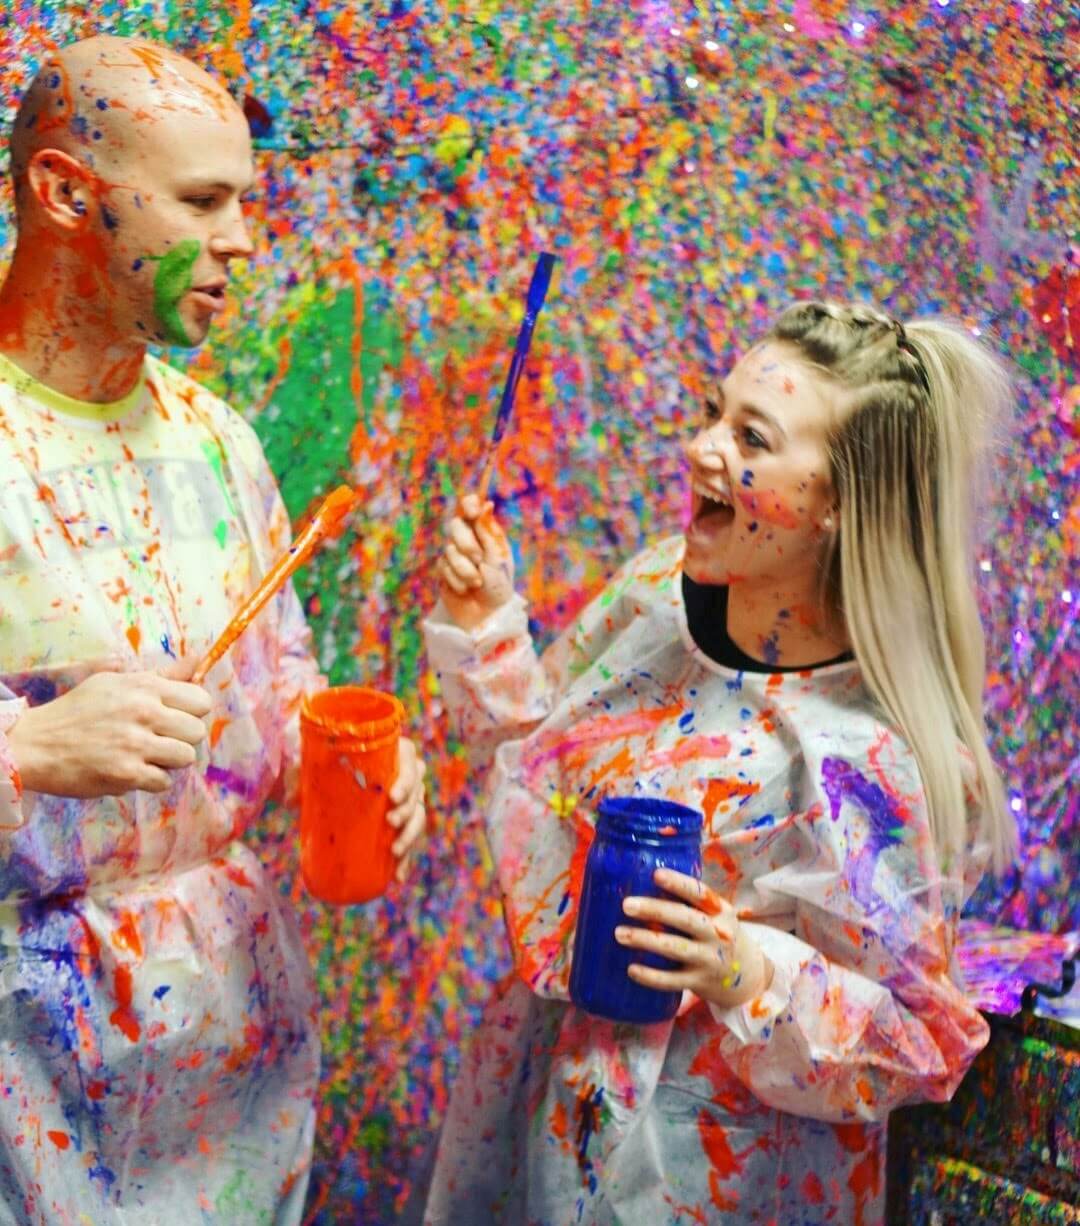 A couple having fun splattering paint on each other in the Splatter Room